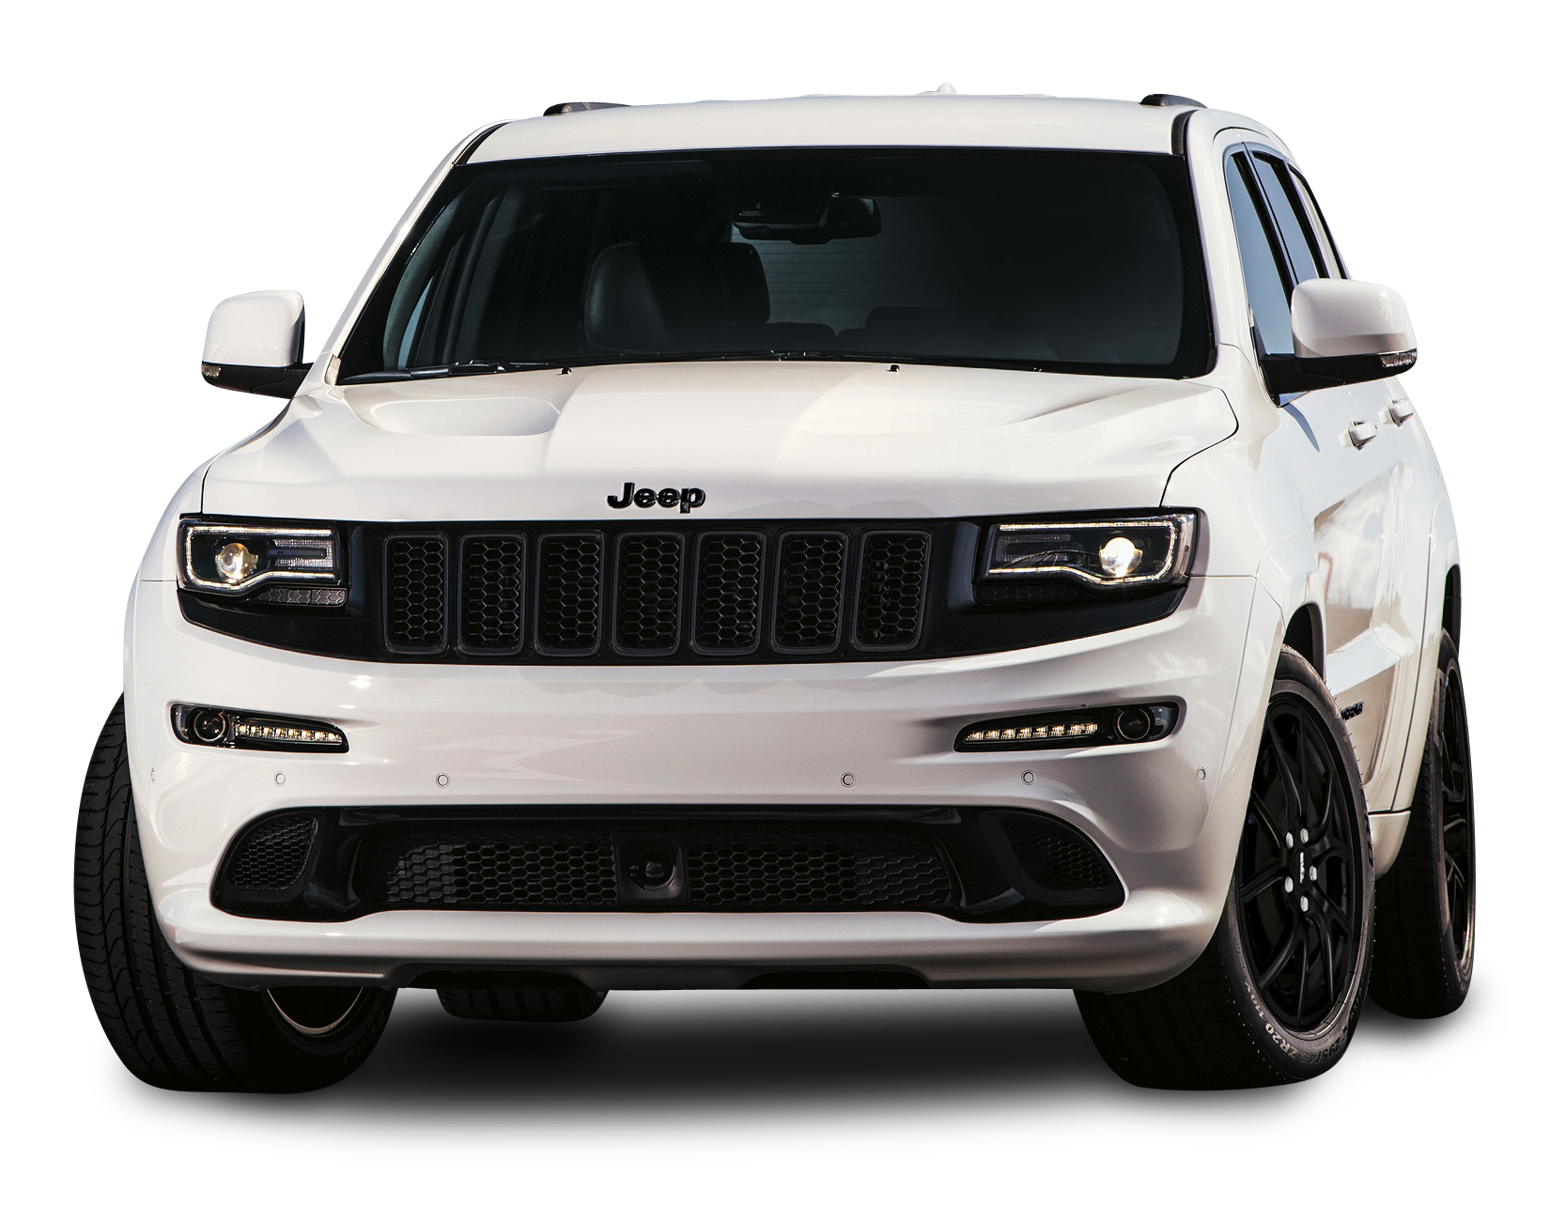 Jeep Png Image For Free Download